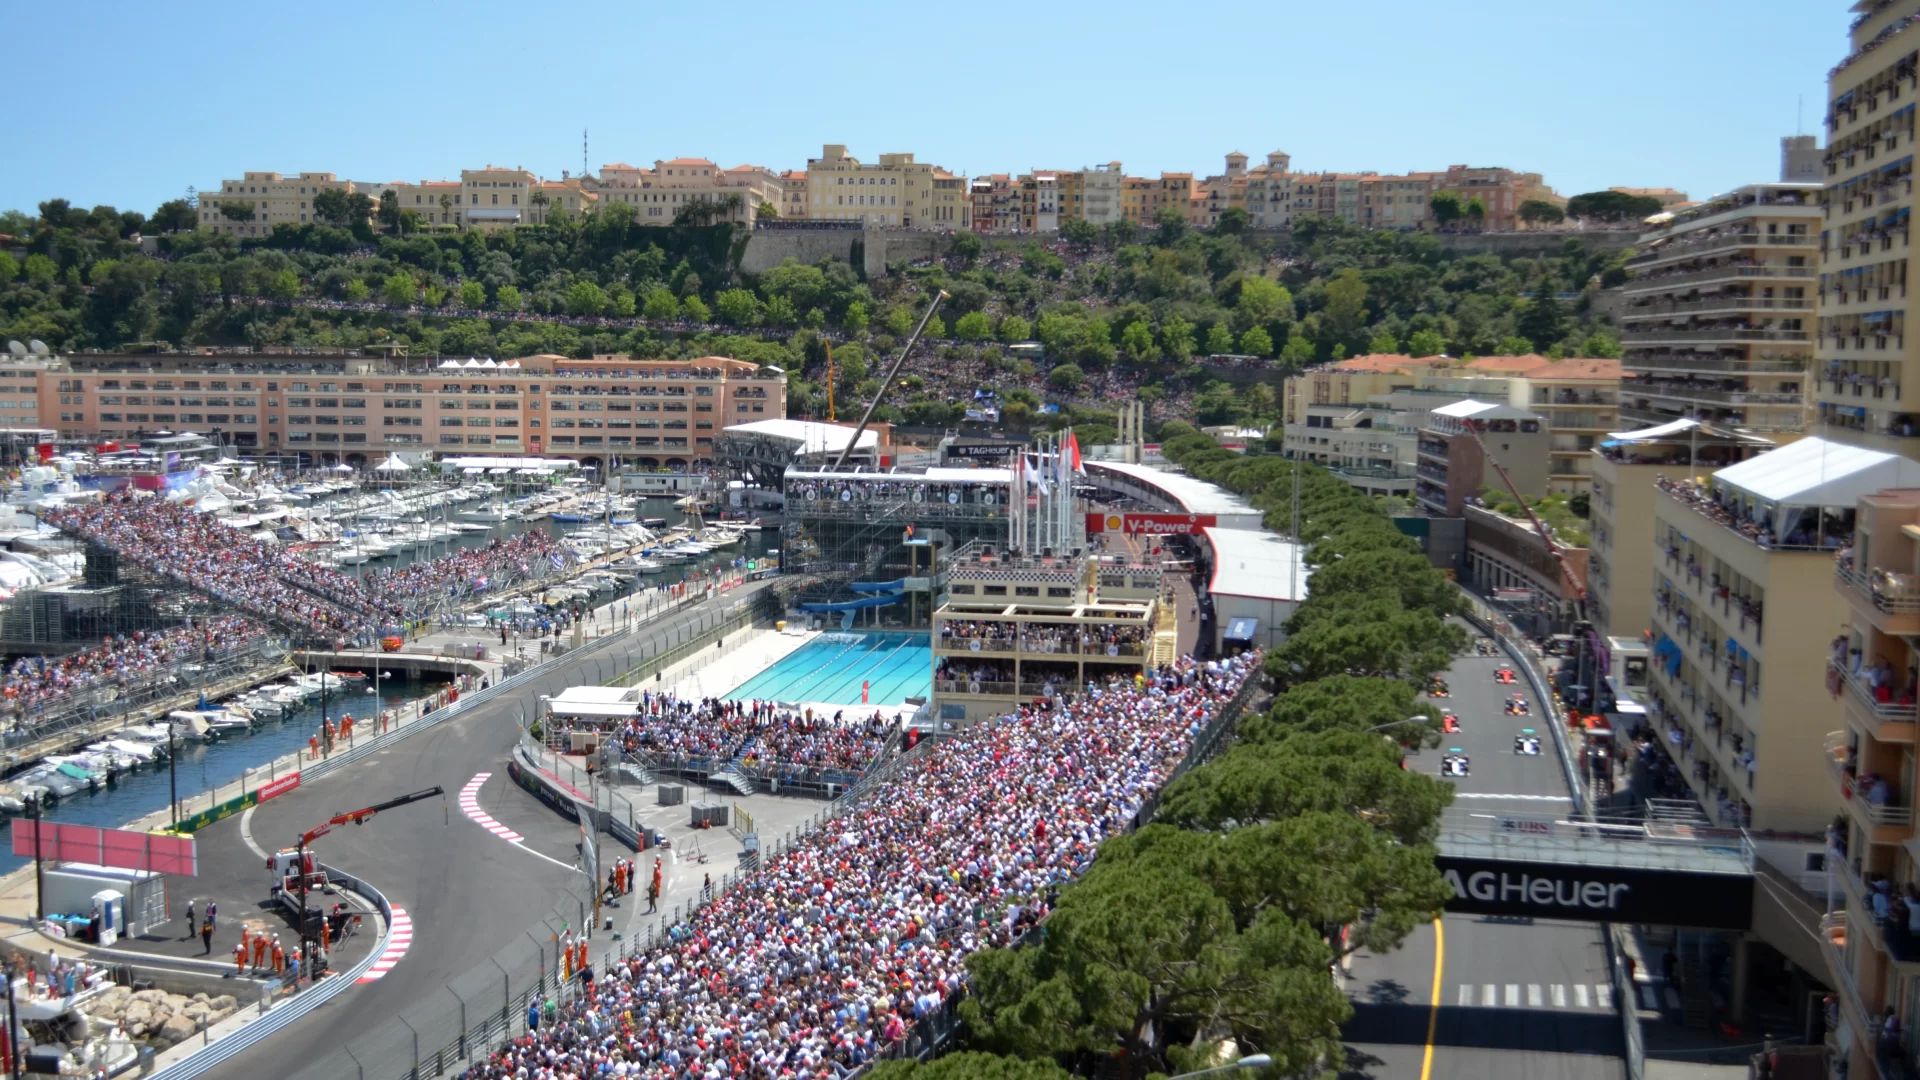 This is the view from Ermanno Palace during formula 1 in Monaco. You see many people in the stands surrounding the track, Le Roche, A pool, and surrounding buildings.